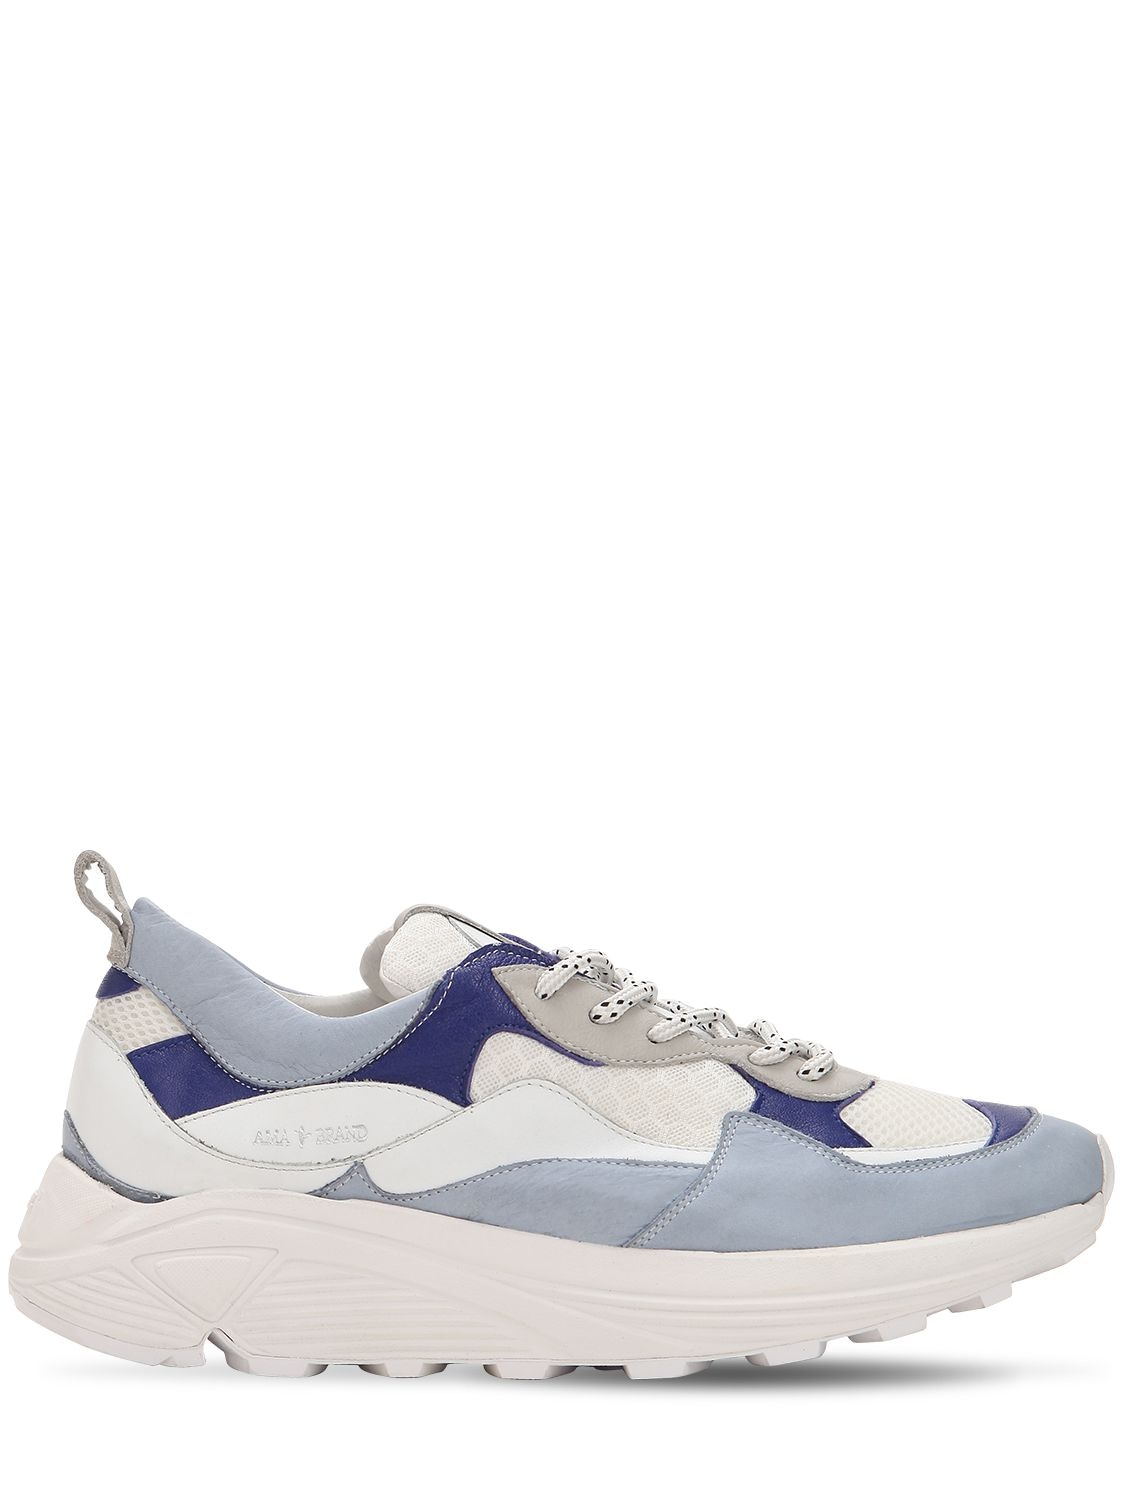 Ama 1250 Leather & Mesh Sneakers In Blue,white